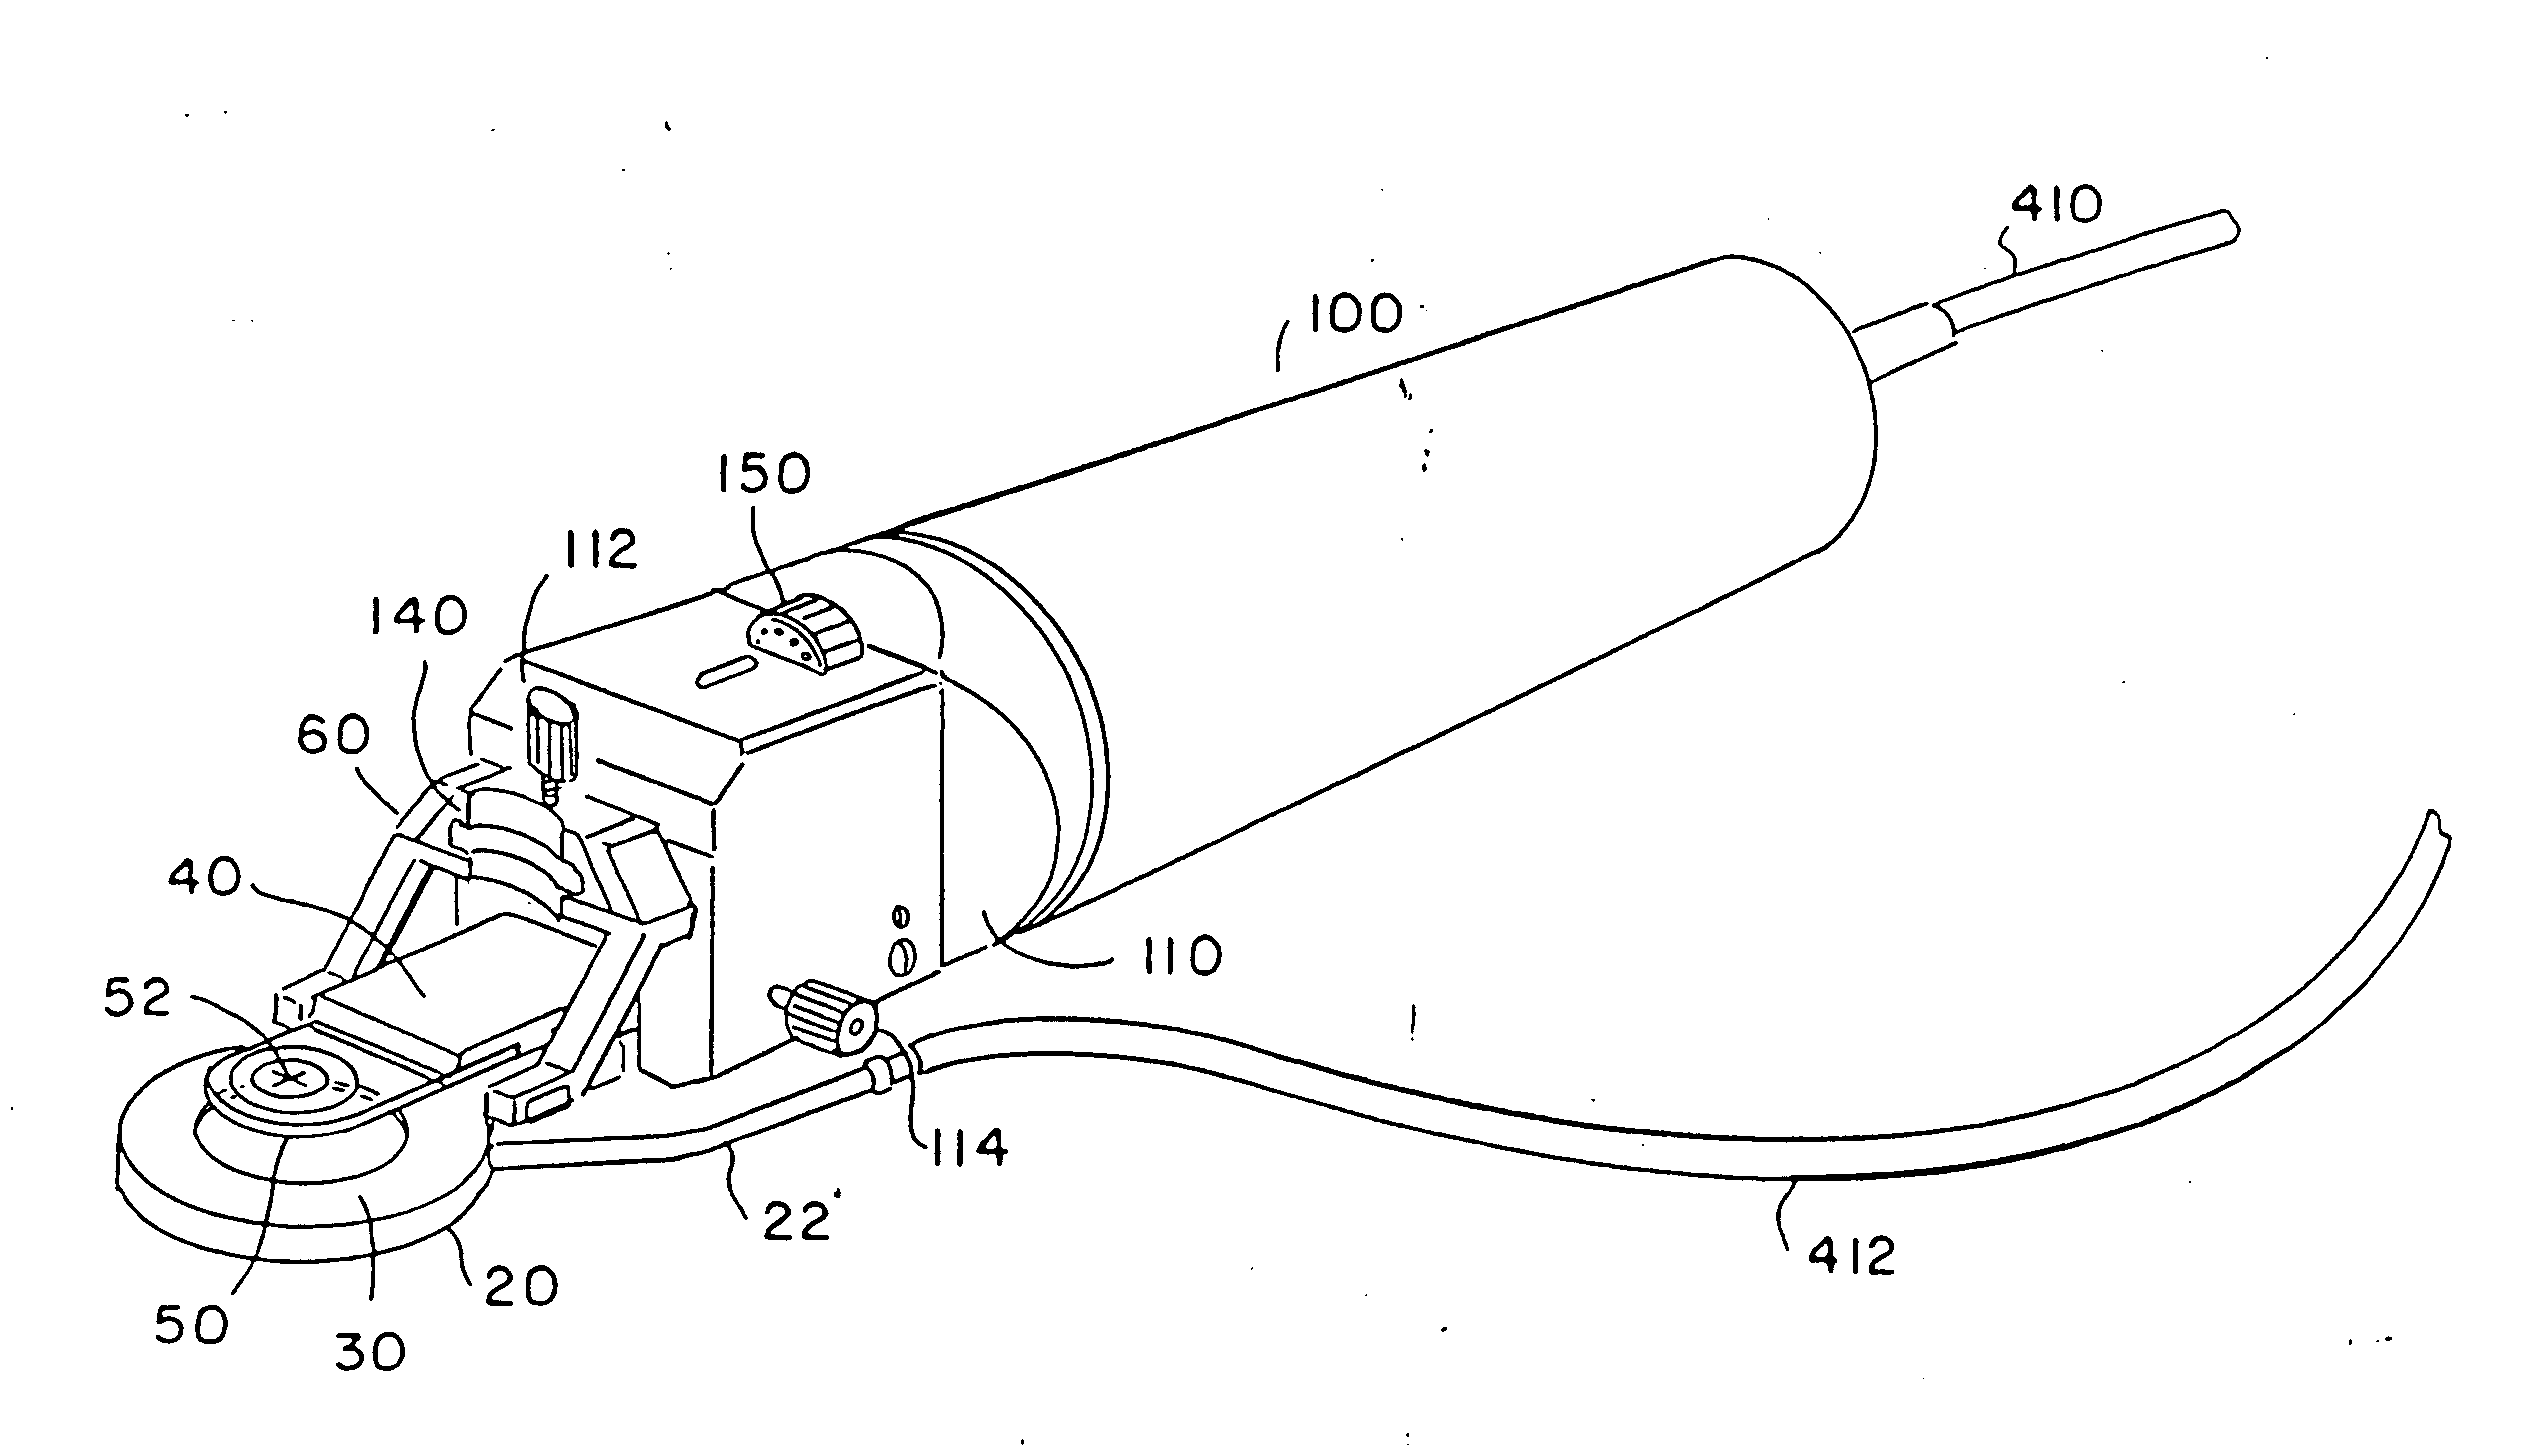 Intracorneal lens placement method and apparatus